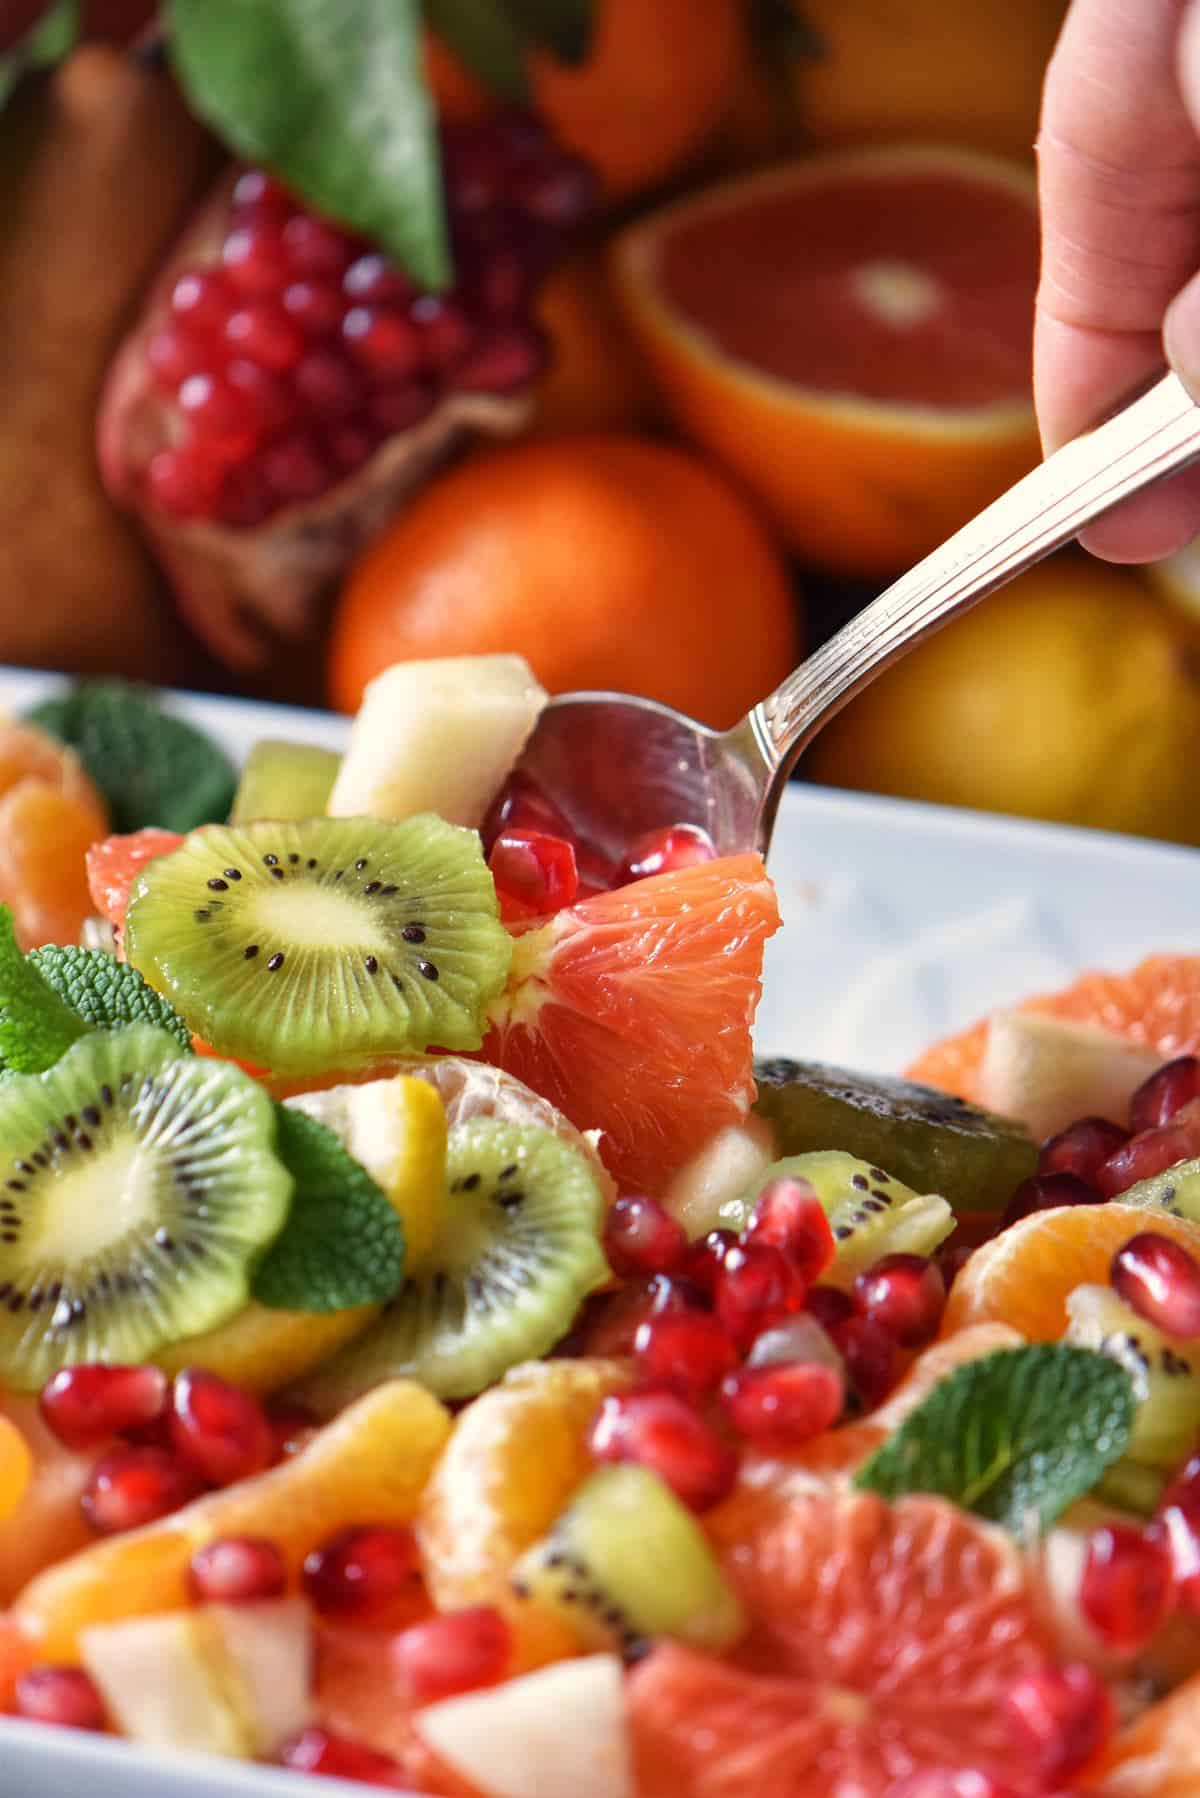 Fruit salad being picked up with a spoon. 